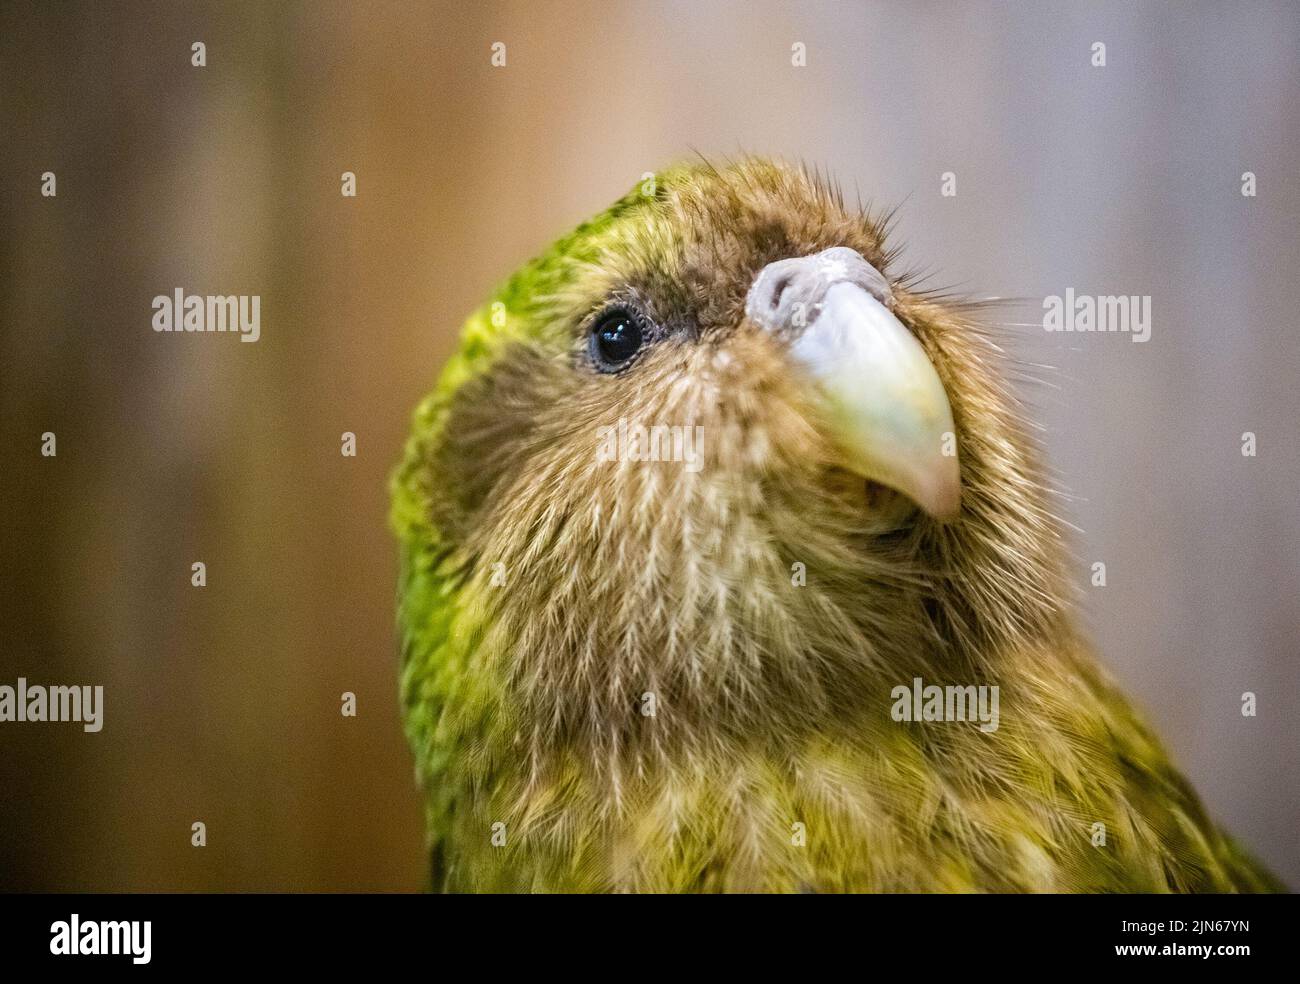 Wellington. 13th Sep, 2018. File photo taken on Sept. 13, 2018 shows a Kakapo at the Orokonui Ecosanctuary in Dunedin, New Zealand. The population of New Zealand's critically endangered flightless parrots, kakapo, have increased from 197 to 252 in the 2022 breeding season. Credit: Yang Liu/Xinhua/Alamy Live News Stock Photo